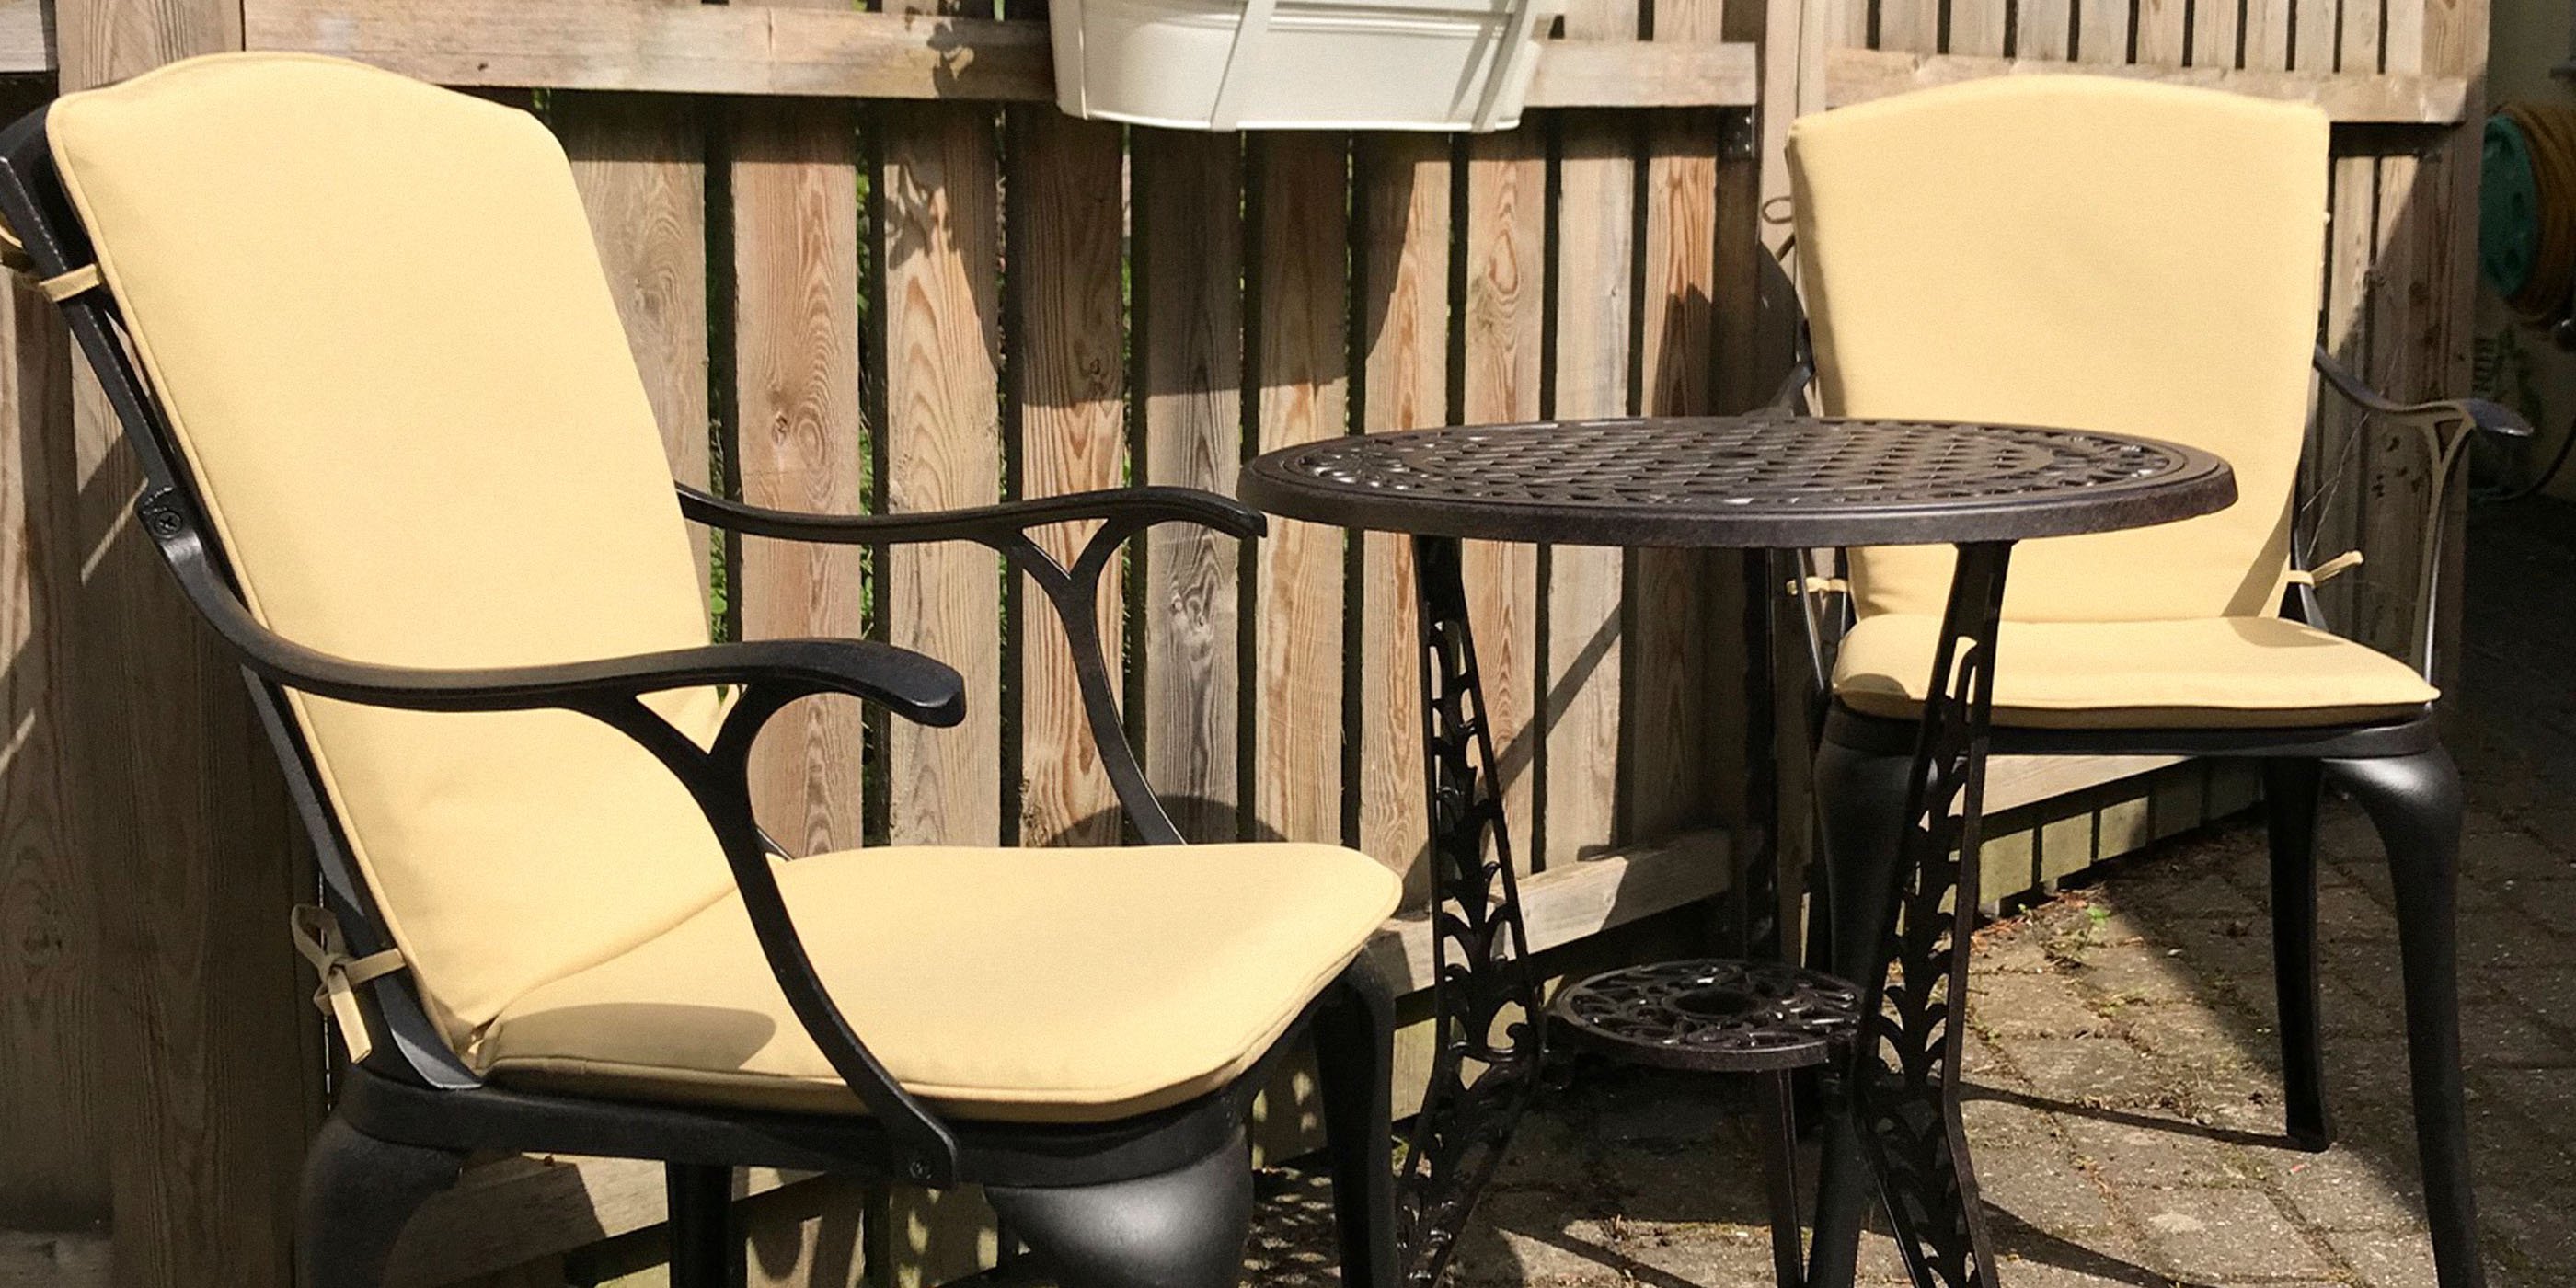 How To Clean Mould Off Outdoor Fabrics, How To Remove Mould From Outdoor Furniture Fabric